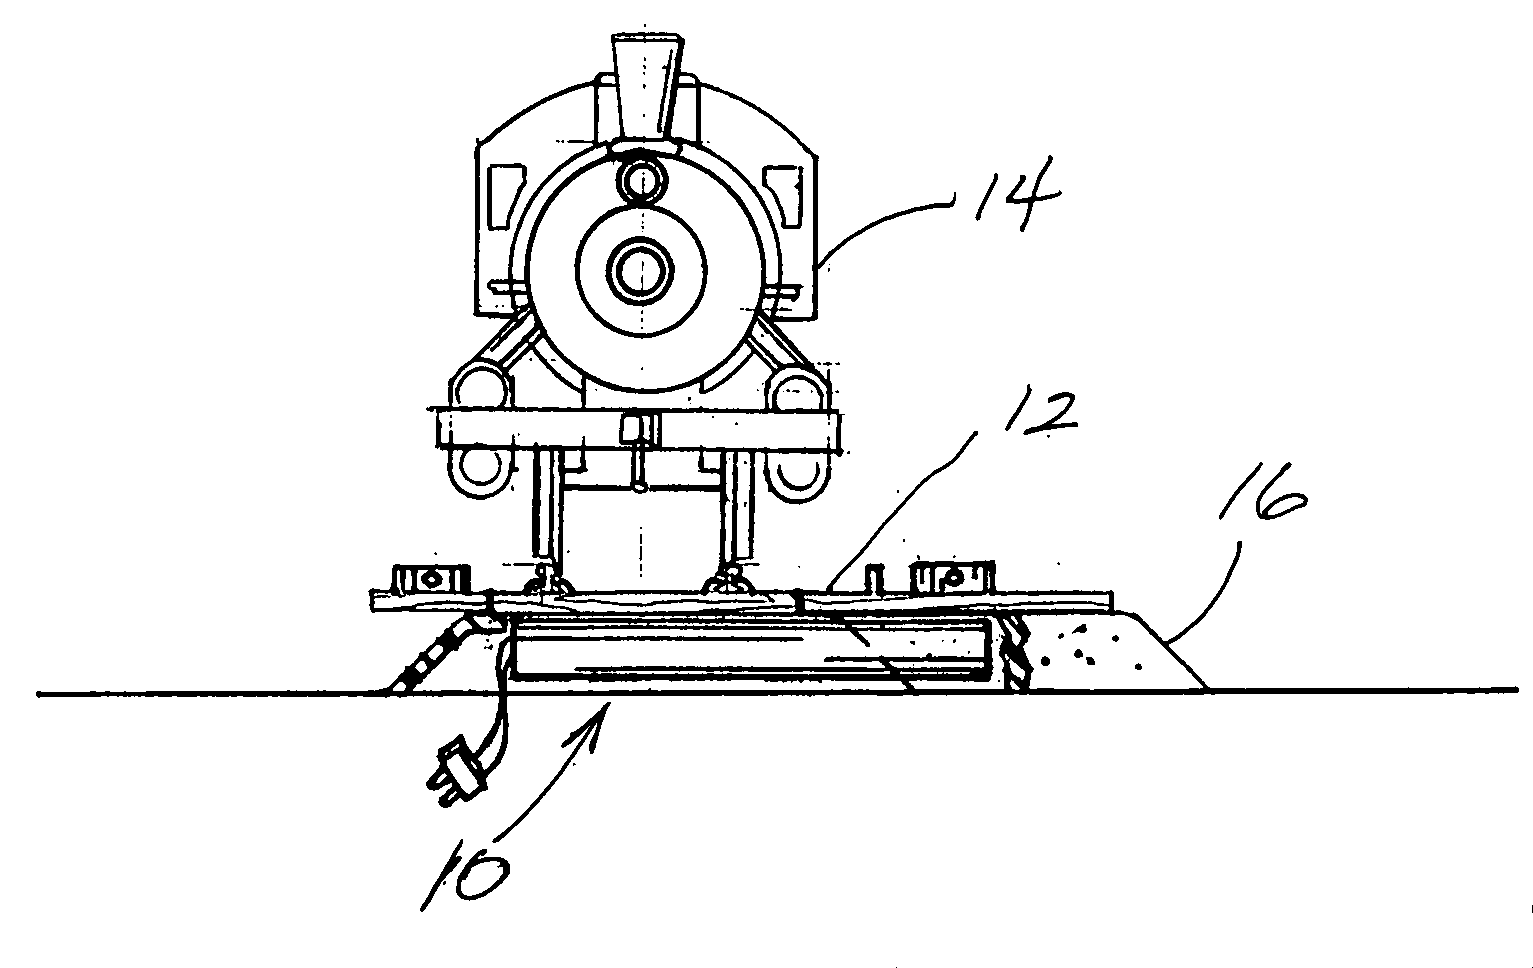 Model railroad track switch actuator assembly